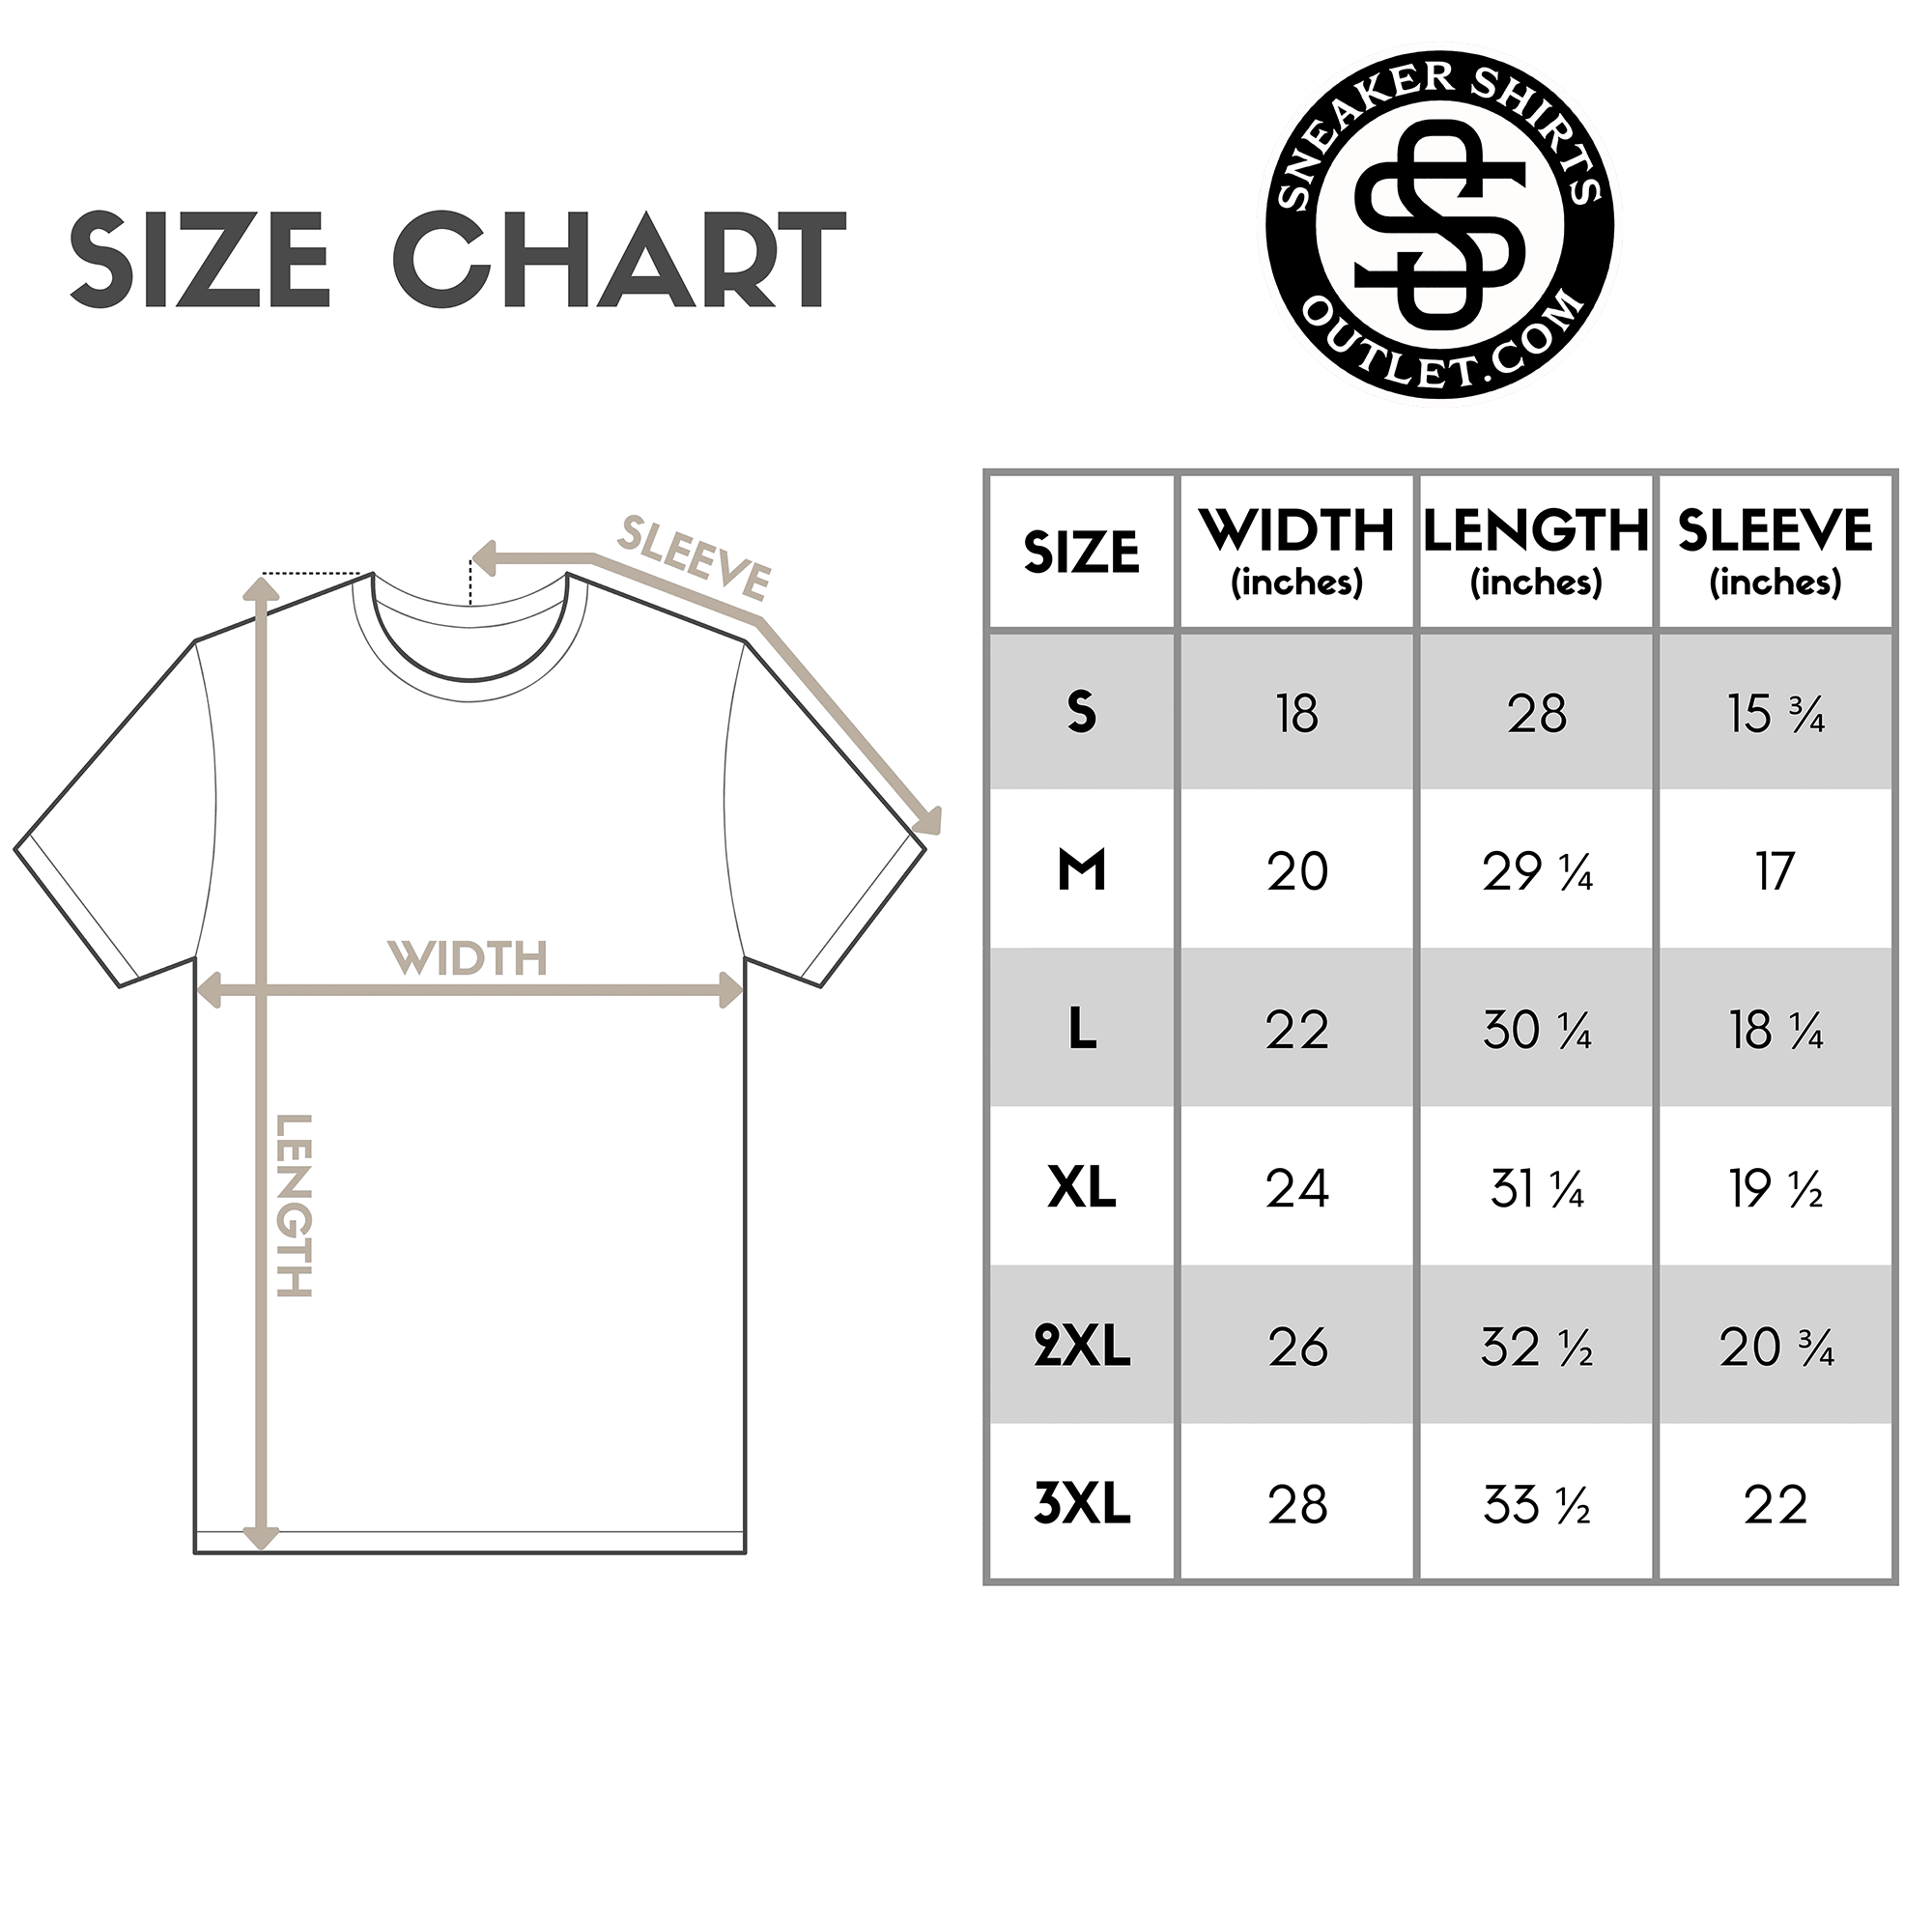 More Money Less Friends Shirt by Dope Star Clothing® size chart photo